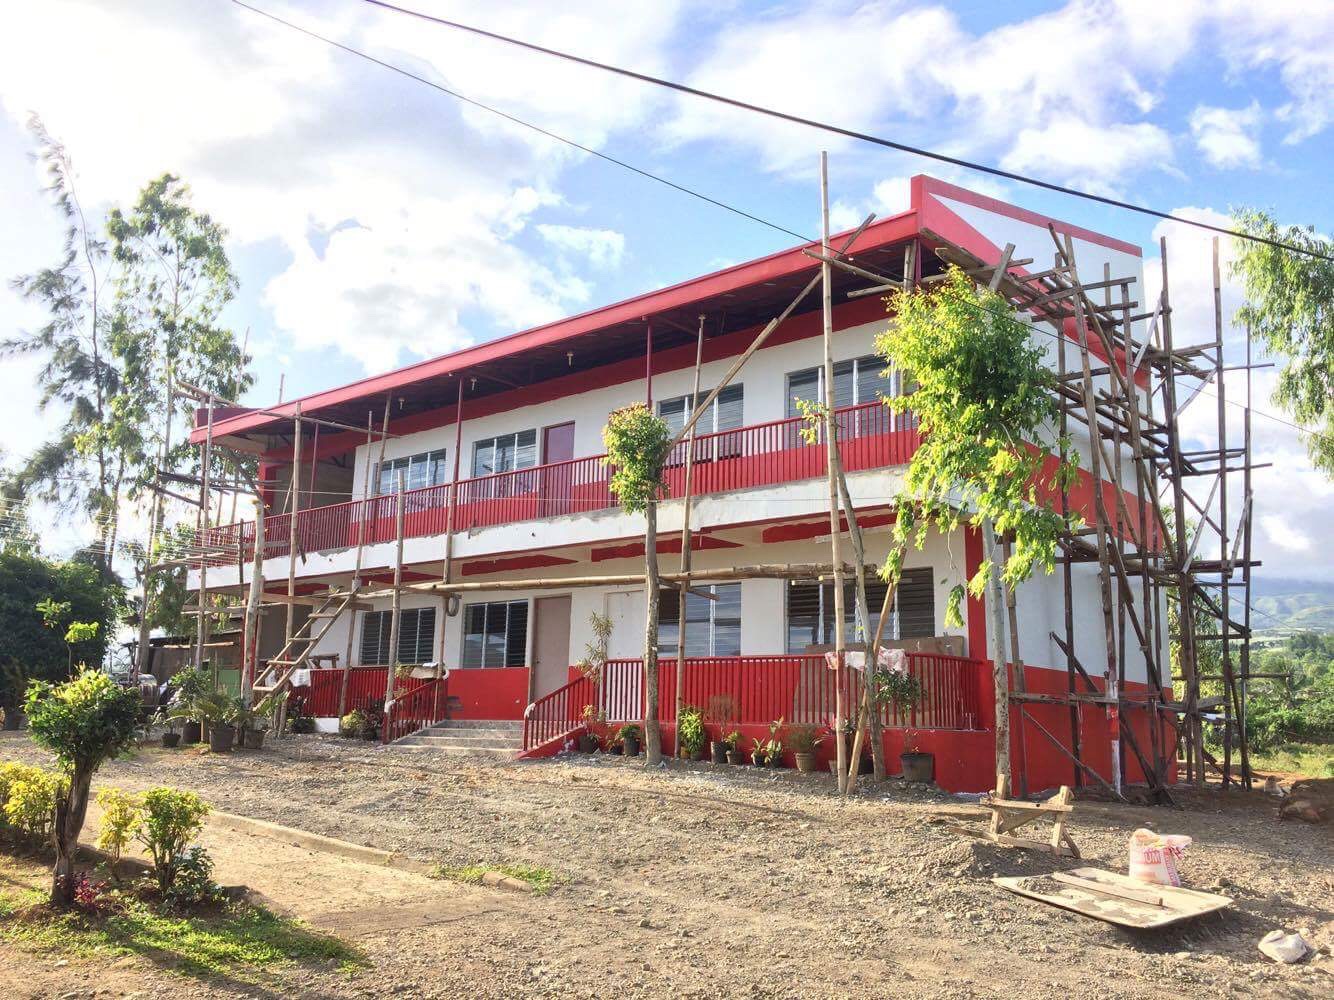  Construction progress update as of December 2016 for the classrooms and community center in Canlaon. 